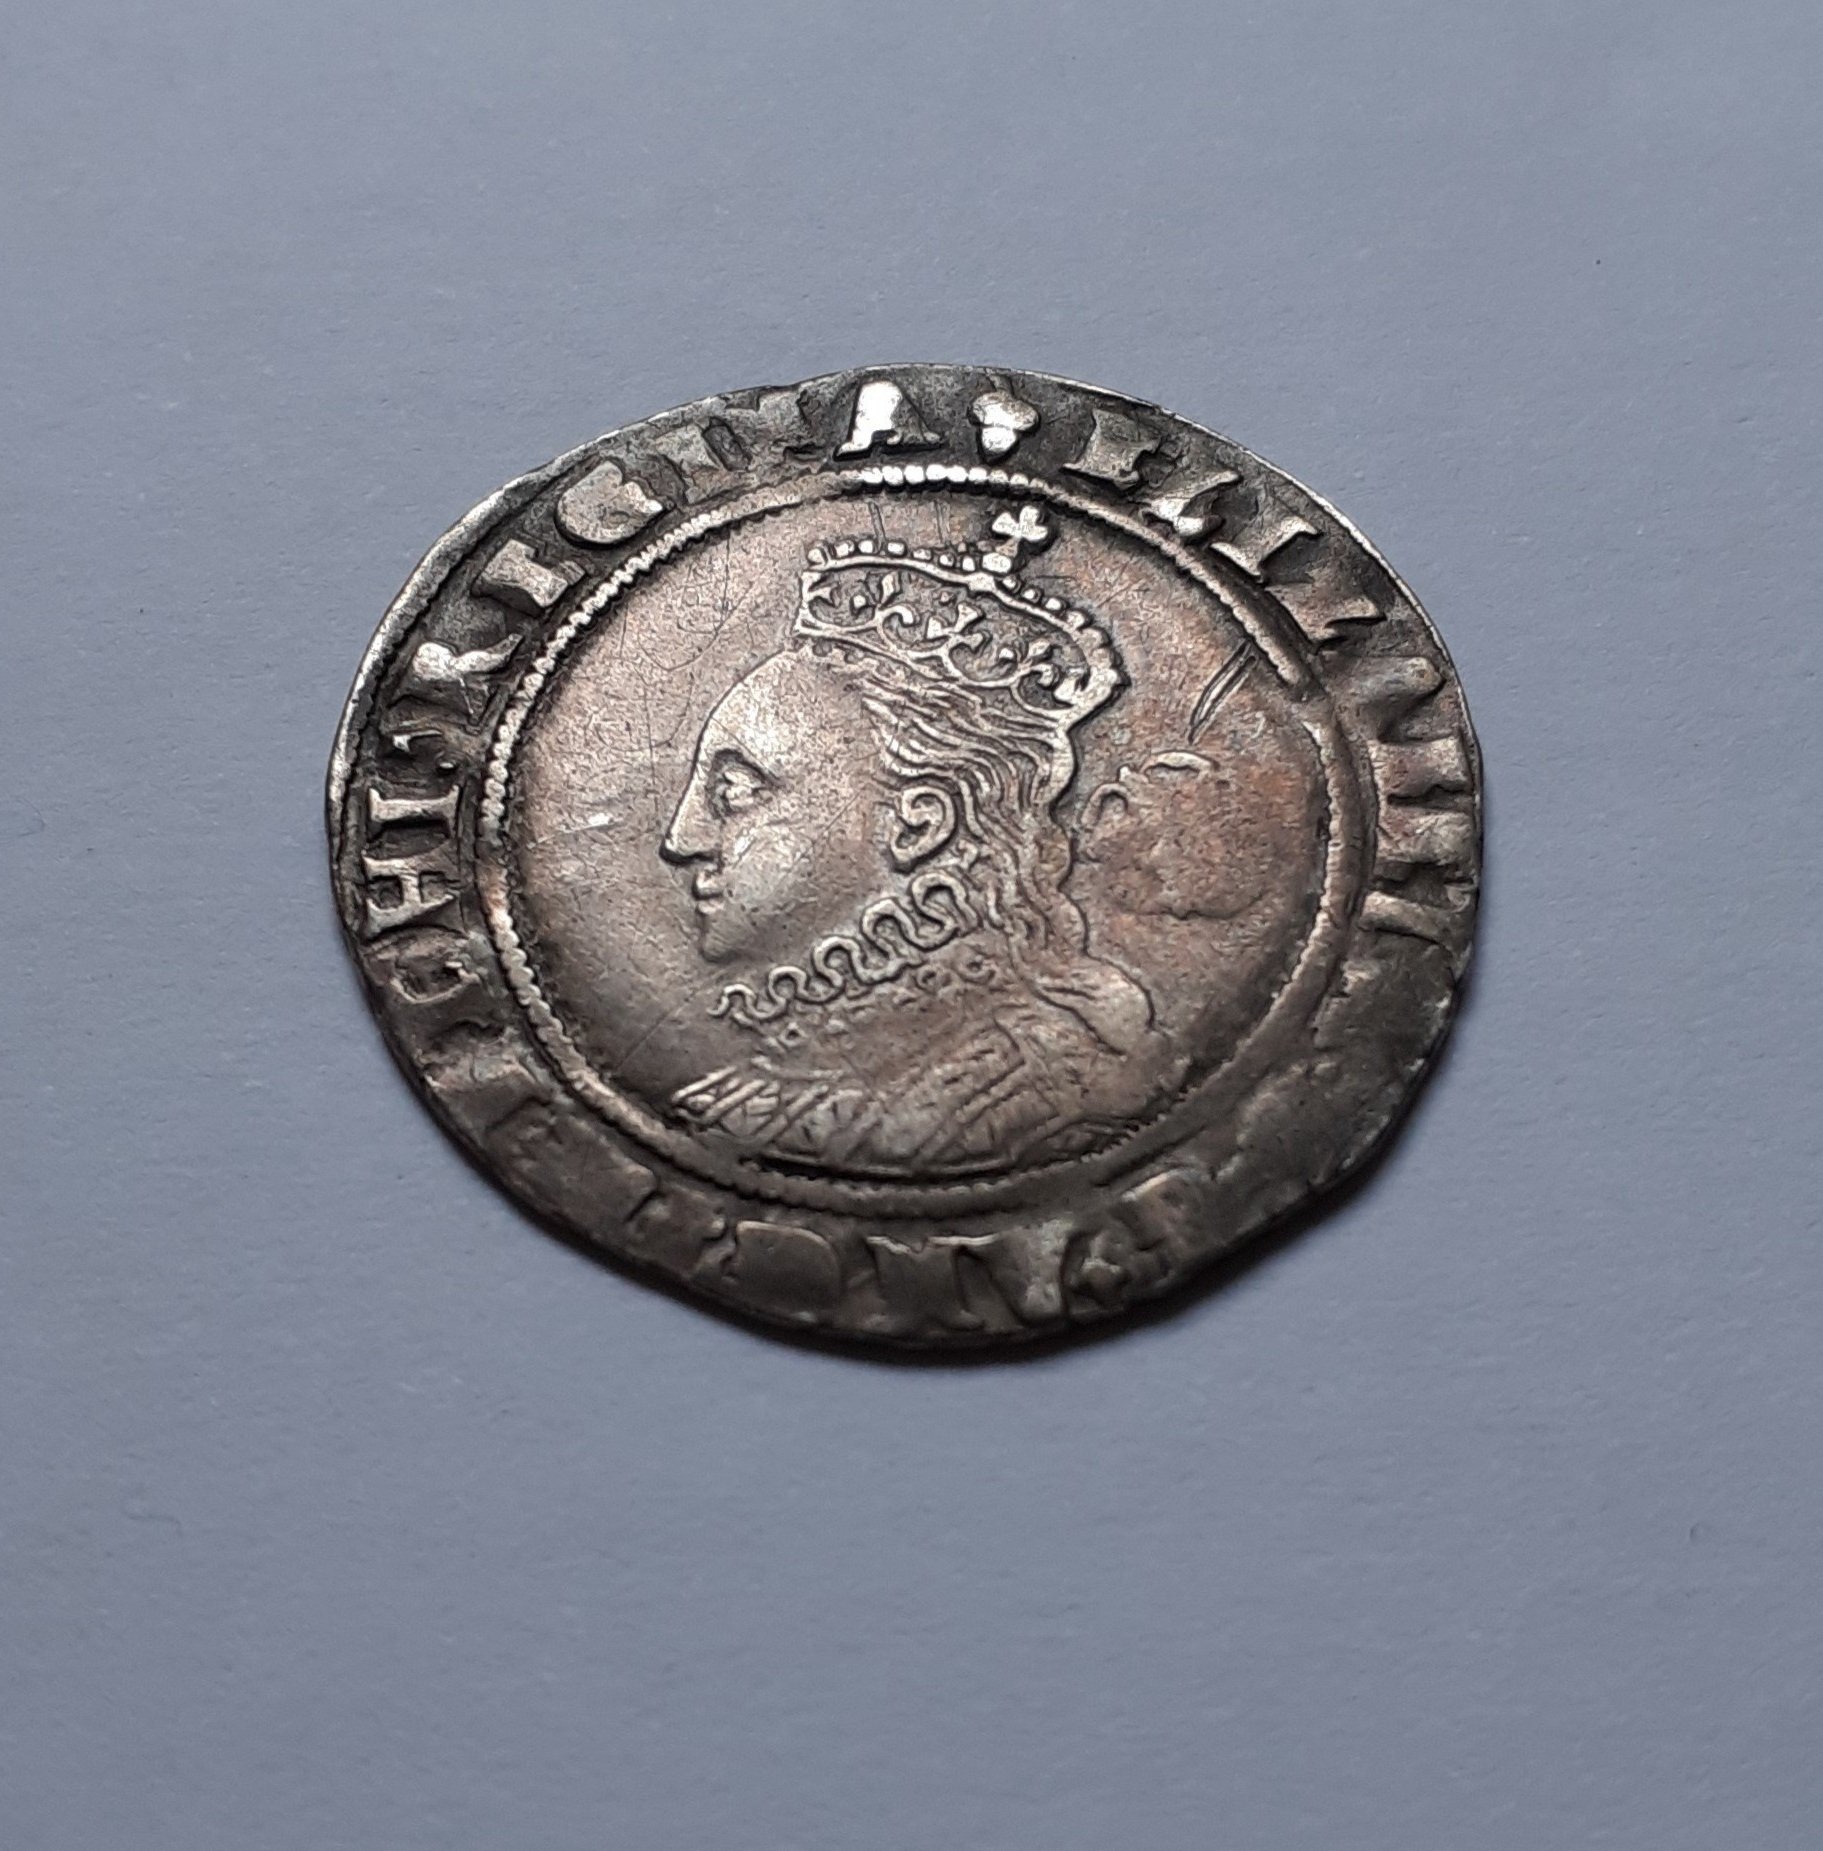 Queen Elizabeth I 1574 Silver Hammered Sixpence.